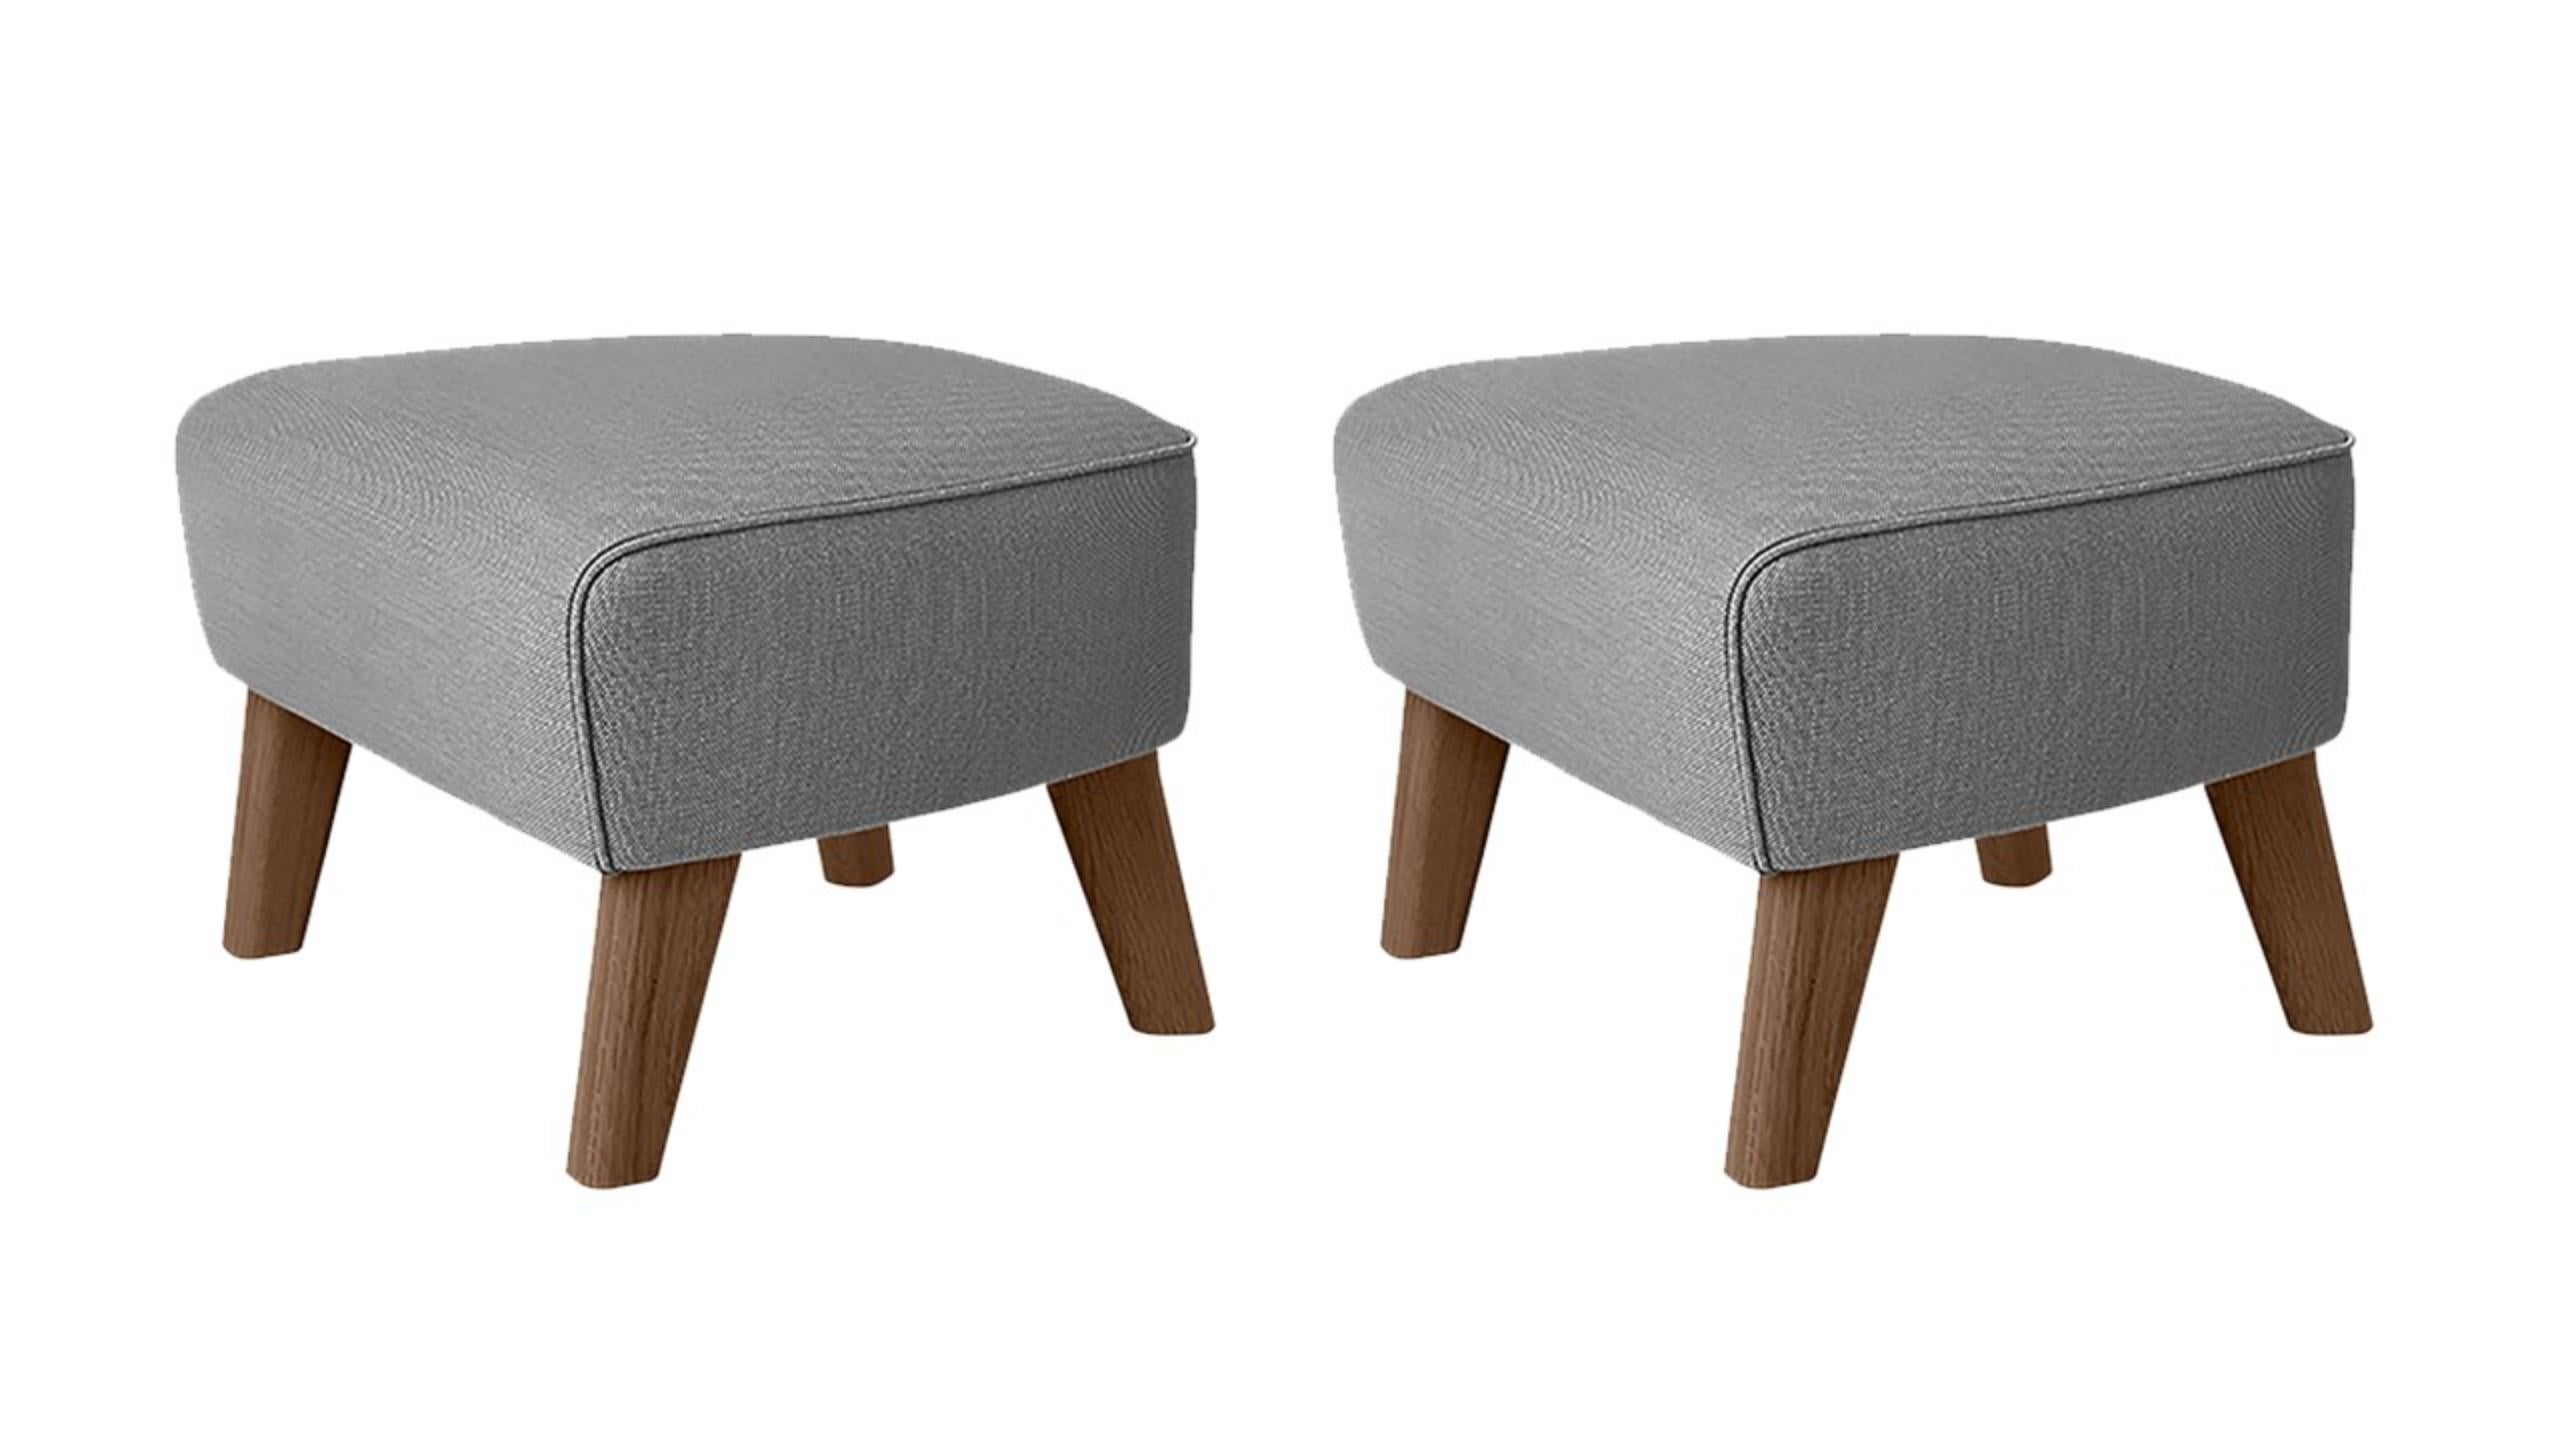 Set of 2 grey and smoked oak sahco zero footstool by Lassen.
Dimensions: W 56 x D 58 x H 40 cm 
Materials: Textile
Also available: other colors available.

The My Own Chair footstool has been designed in the same spirit as Flemming Lassen’s